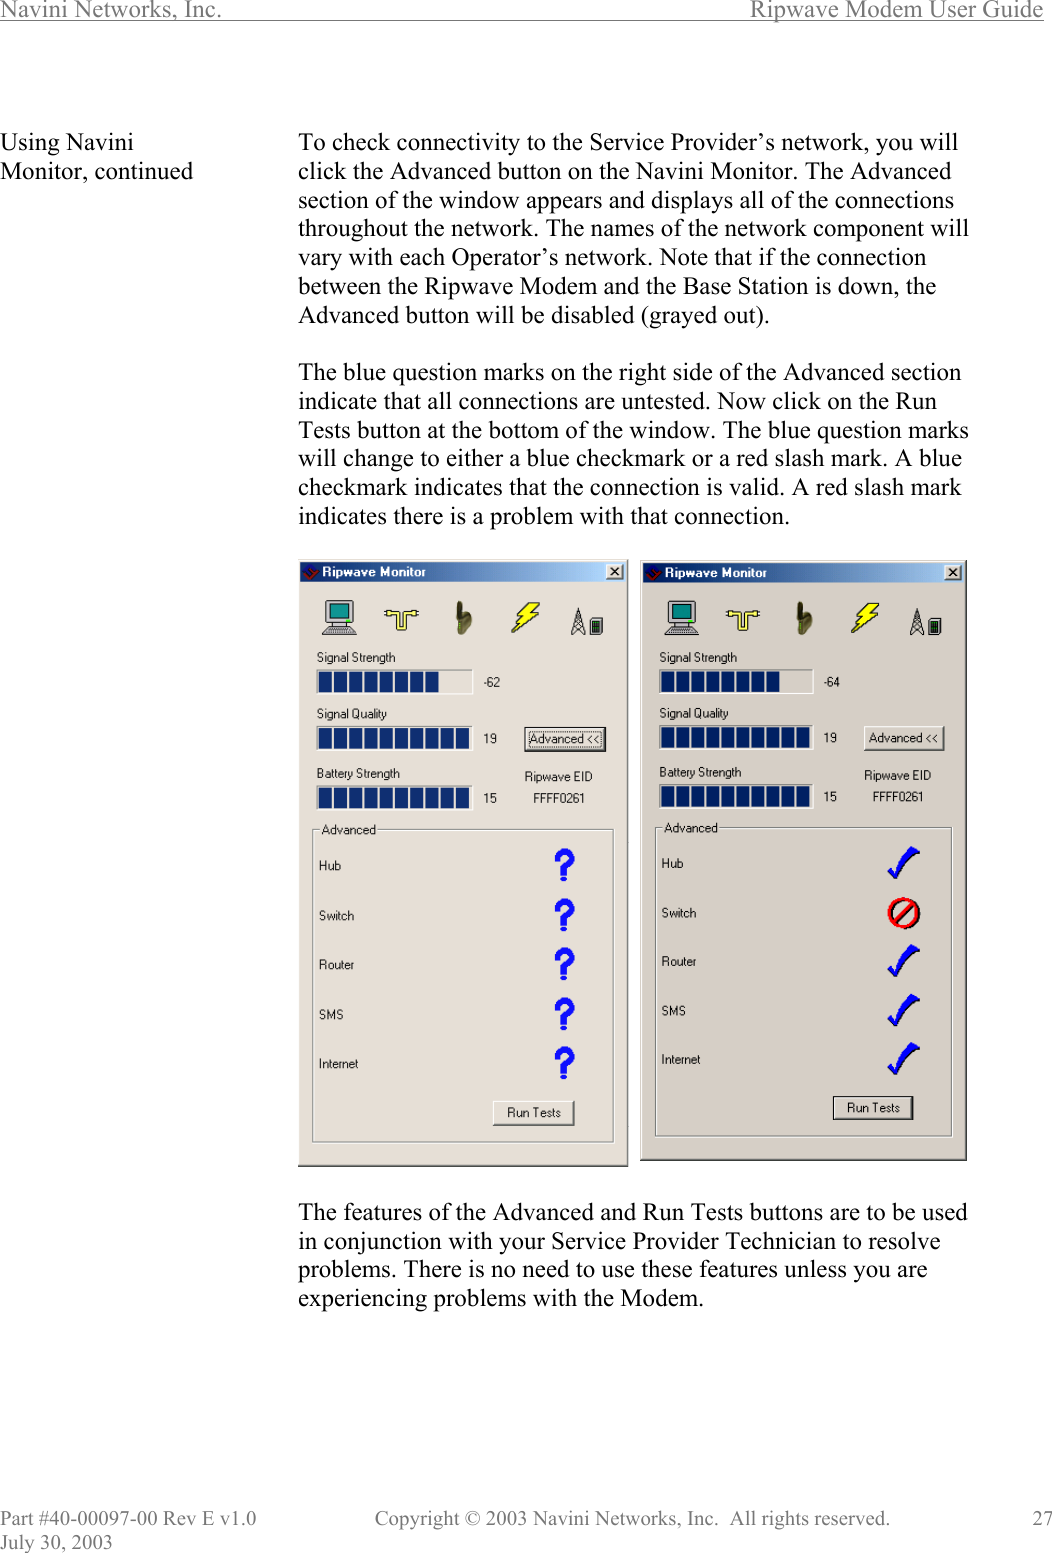 Navini Networks, Inc.        Ripwave Modem User Guide Part #40-00097-00 Rev E v1.0    Copyright © 2003 Navini Networks, Inc.  All rights reserved.               27 July 30, 2003  Using Navini Monitor, continued                                             To check connectivity to the Service Provider’s network, you will click the Advanced button on the Navini Monitor. The Advanced section of the window appears and displays all of the connections throughout the network. The names of the network component will vary with each Operator’s network. Note that if the connection between the Ripwave Modem and the Base Station is down, the Advanced button will be disabled (grayed out).  The blue question marks on the right side of the Advanced section indicate that all connections are untested. Now click on the Run Tests button at the bottom of the window. The blue question marks will change to either a blue checkmark or a red slash mark. A blue checkmark indicates that the connection is valid. A red slash mark indicates there is a problem with that connection.    The features of the Advanced and Run Tests buttons are to be used in conjunction with your Service Provider Technician to resolve problems. There is no need to use these features unless you are experiencing problems with the Modem.       